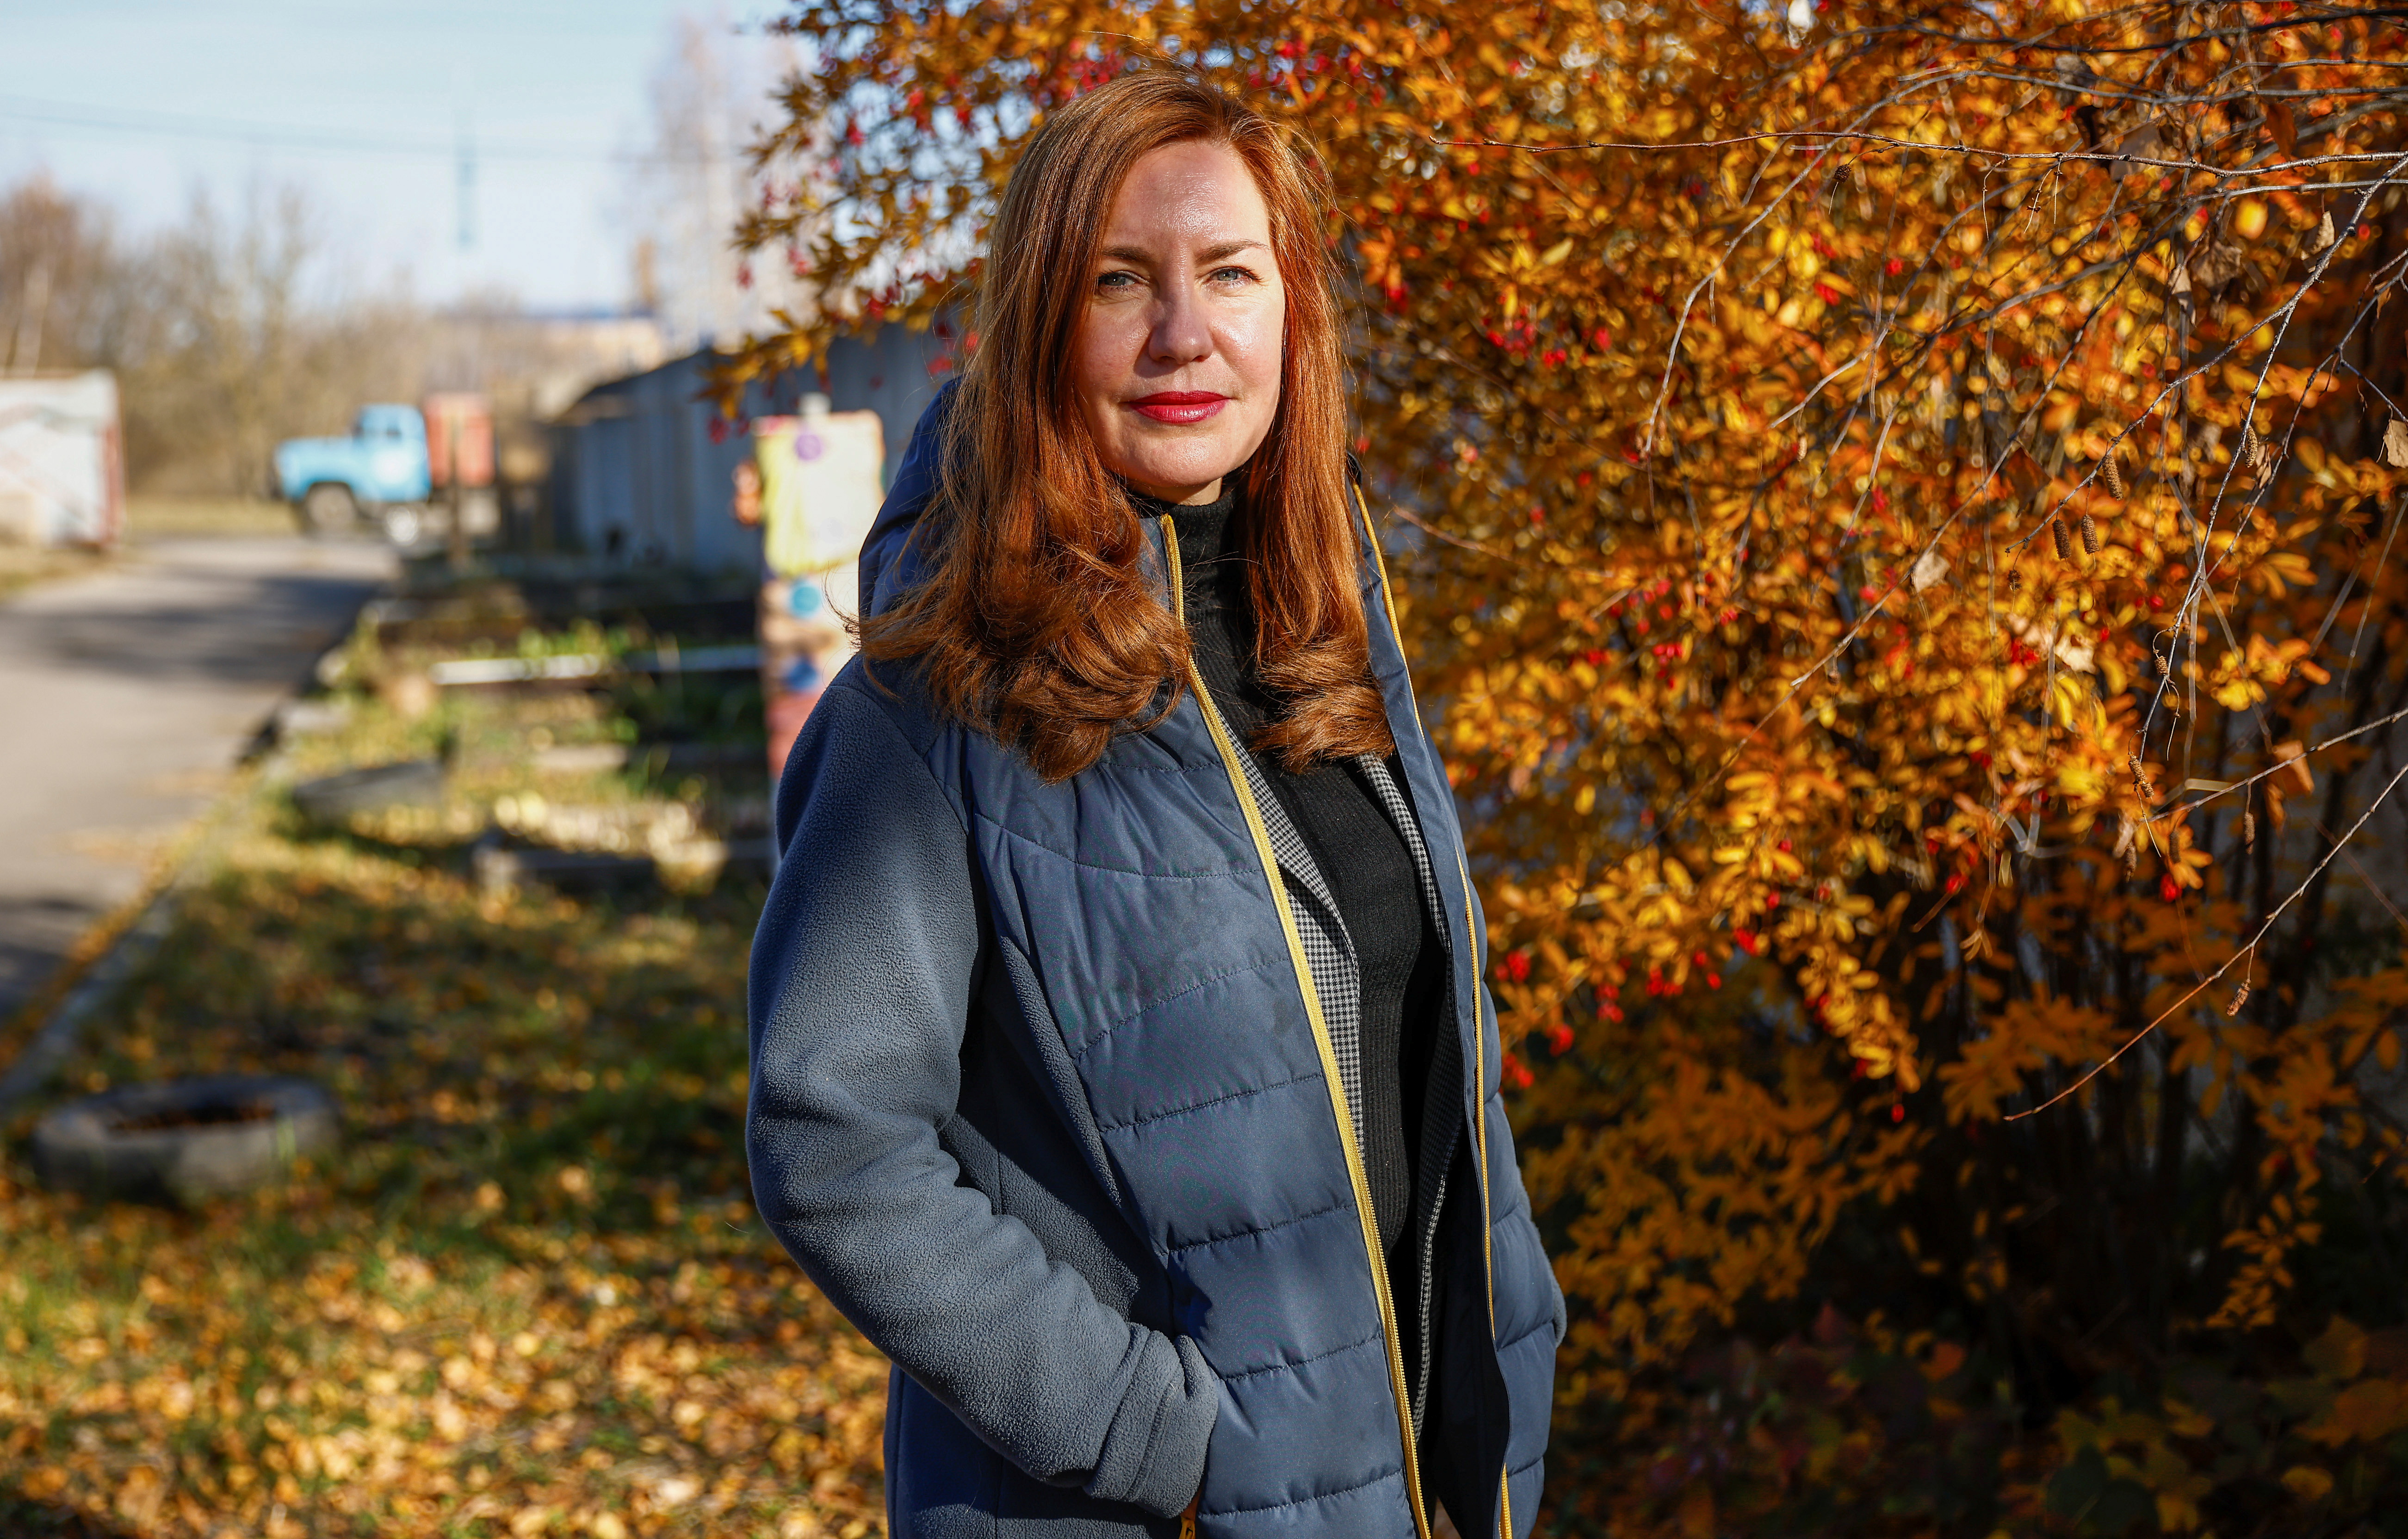 Head of the Oryol doctors' trade union Elena Shuraeva poses for a picture after an interview in the city of Oryol